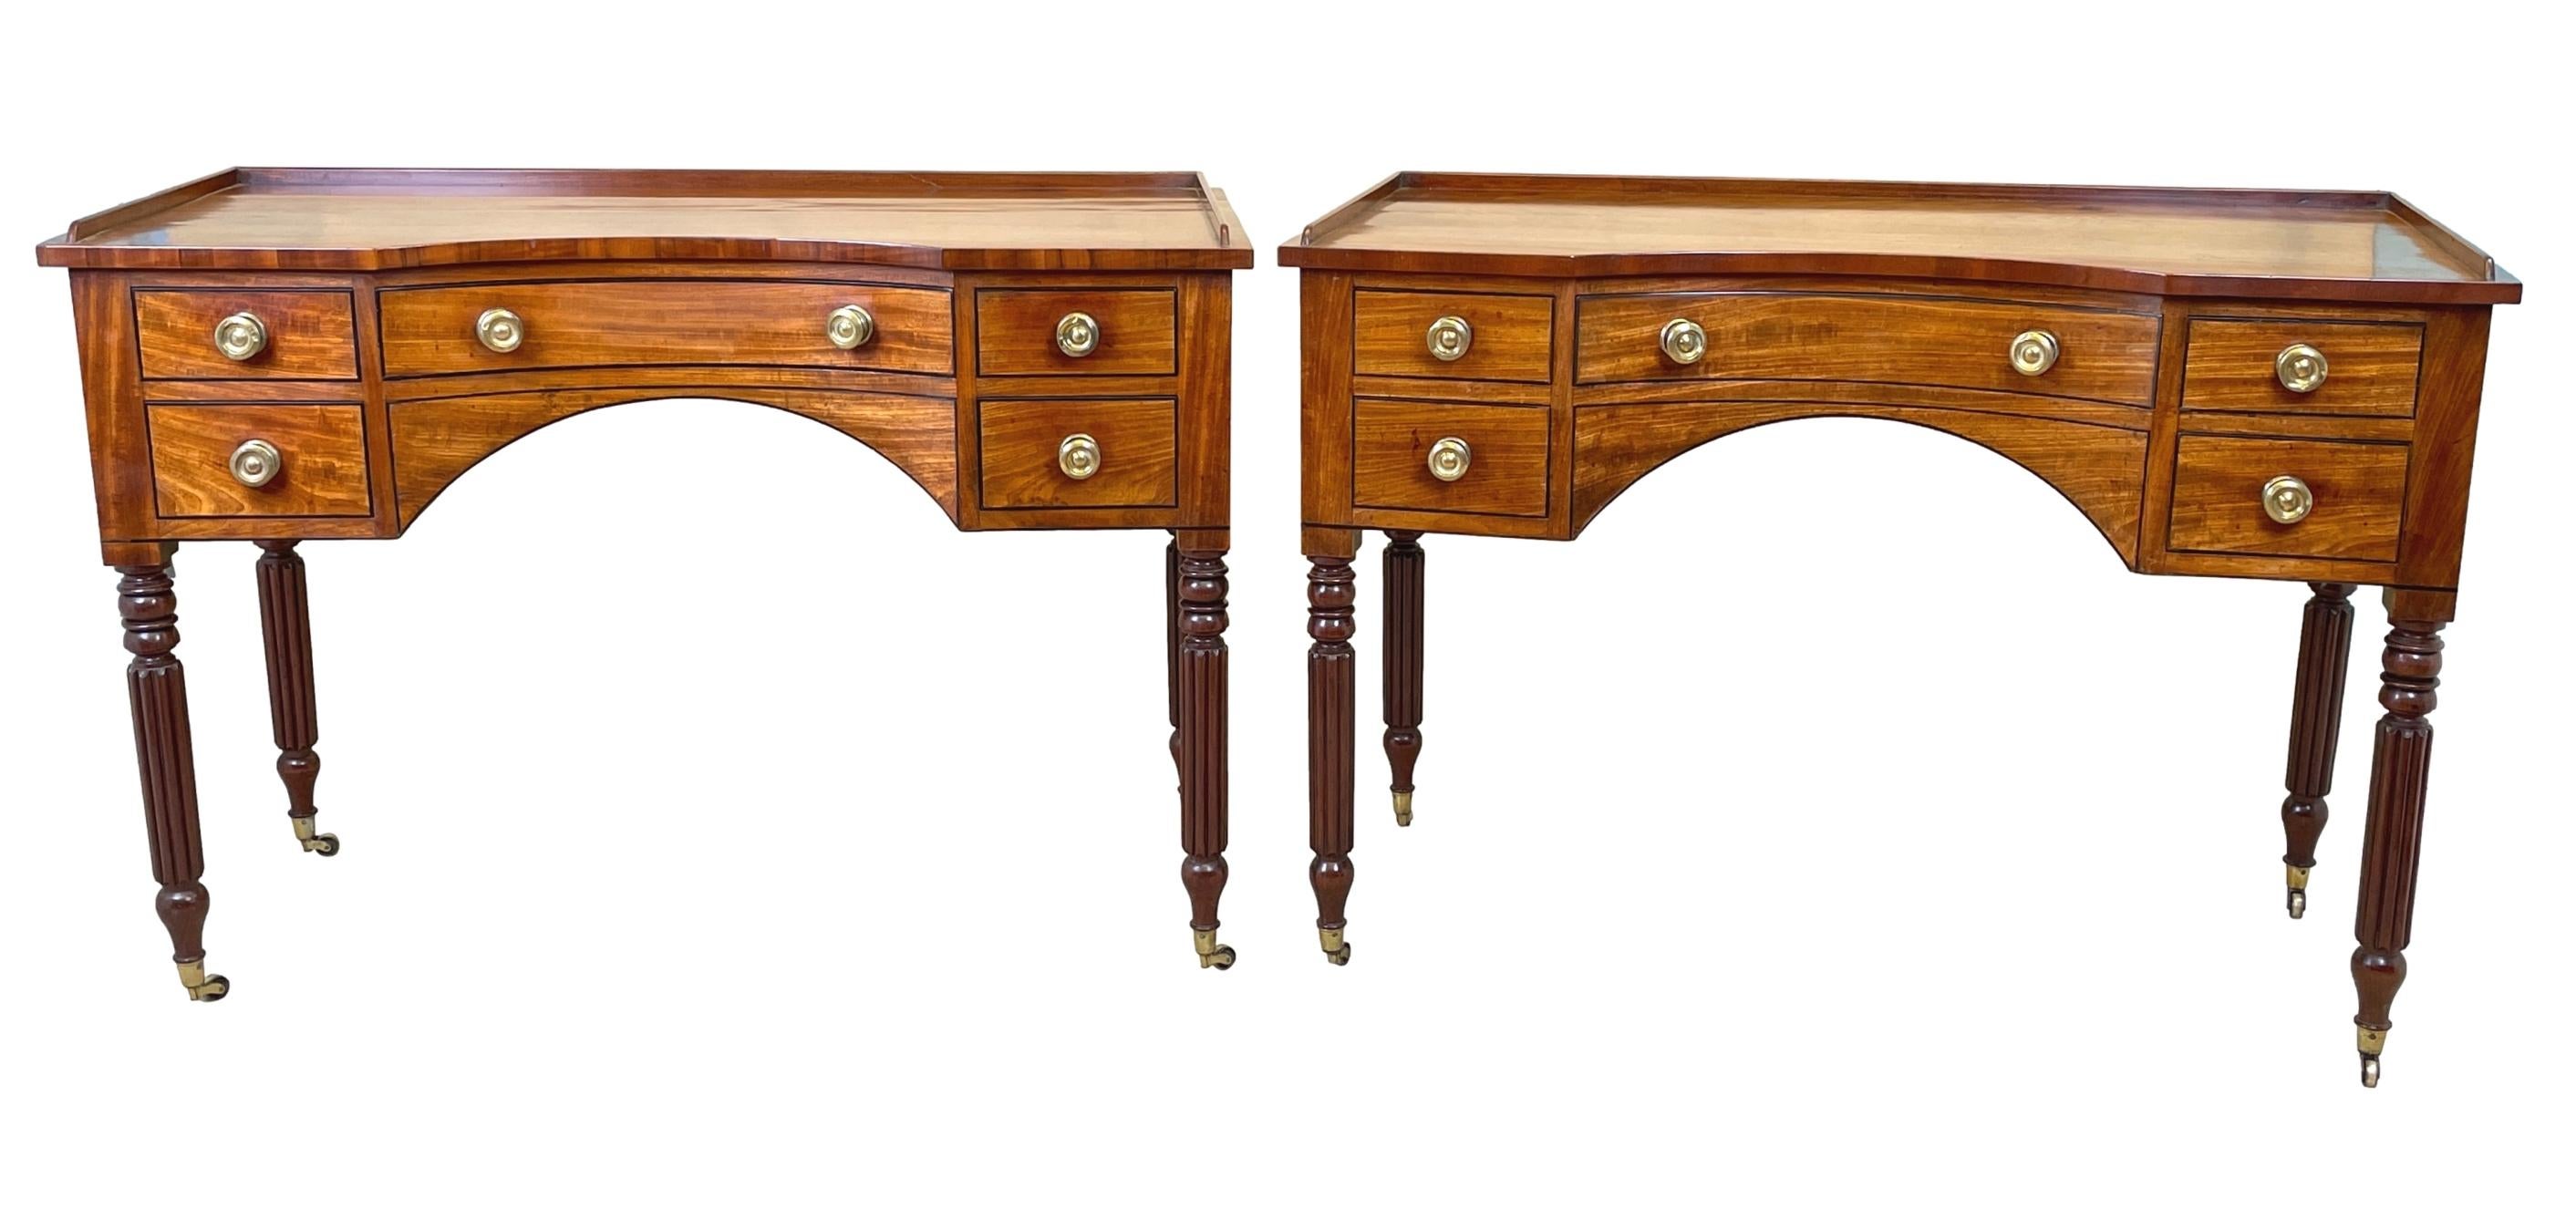 Rare Pair Of Regency Mahogany Dressing Tables For Sale 8